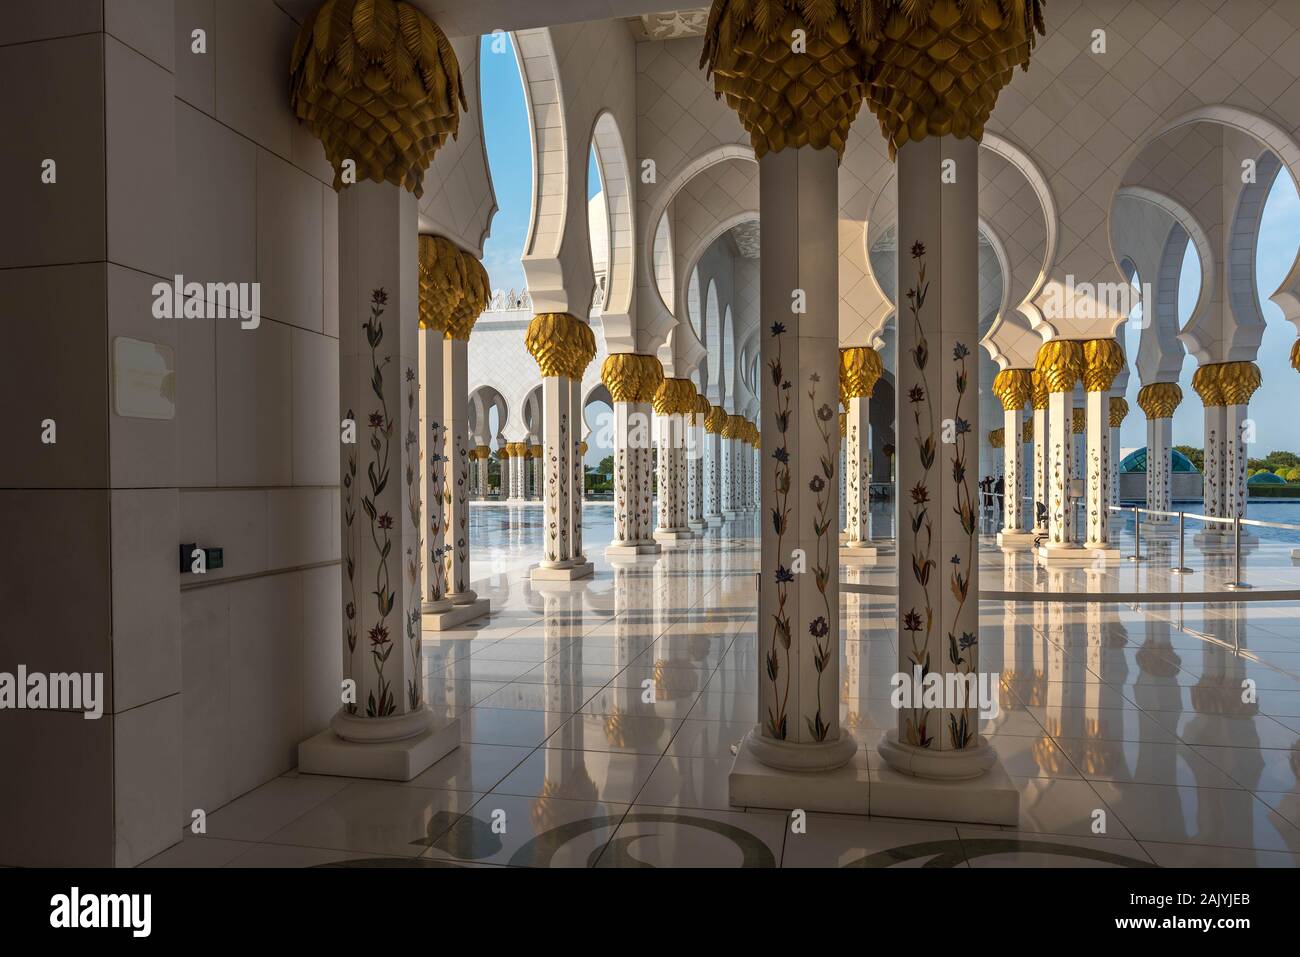 Abu Dhabi, United Arab Emirates: A colonnade of Abu Dhabi Sheikh Zayed Mosque (also known as Grand Mosque) marble twin columns and golden capitals Stock Photo